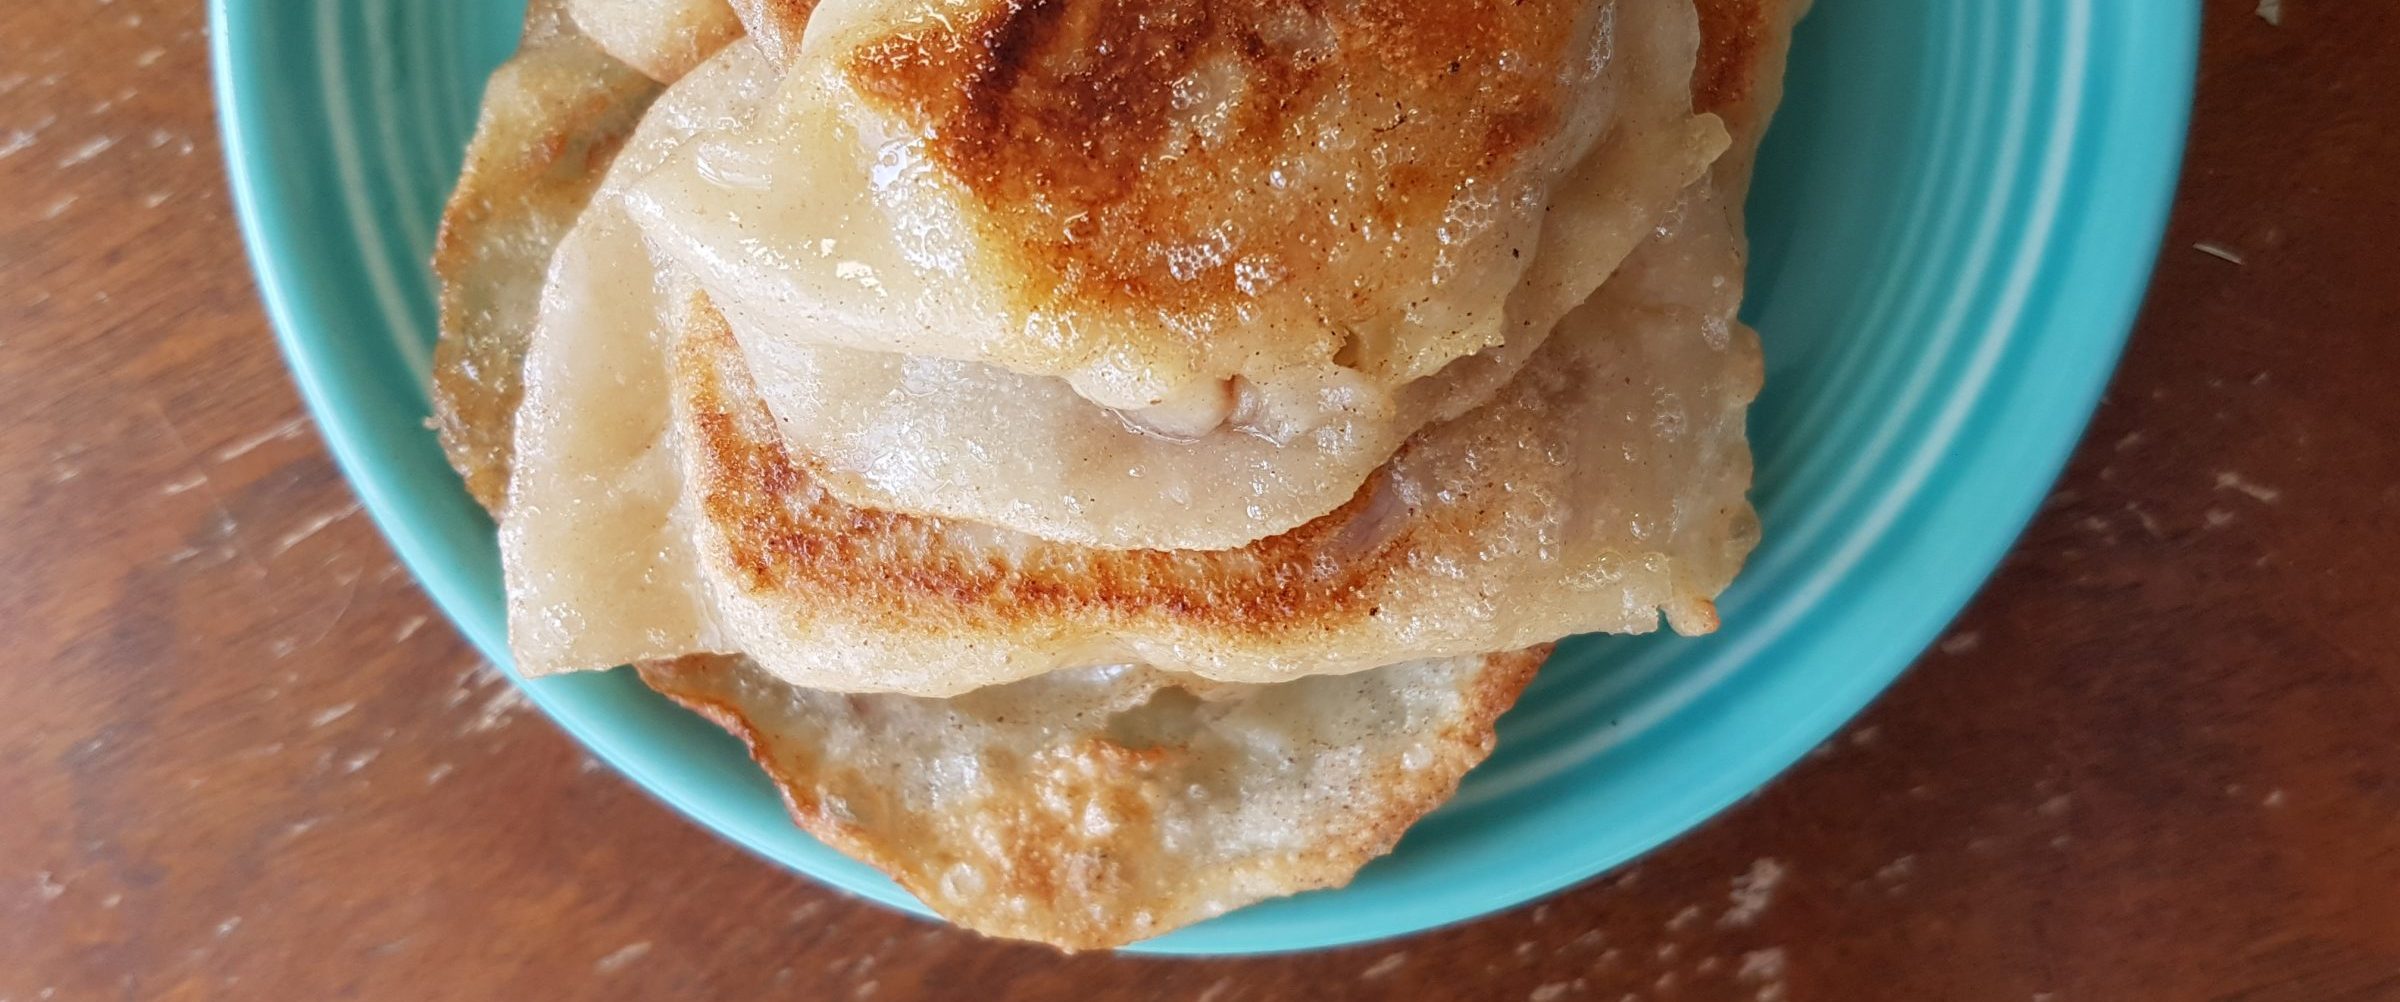 Introducing the Canadian Maple Bacon pierogi by Little Foot Foods.